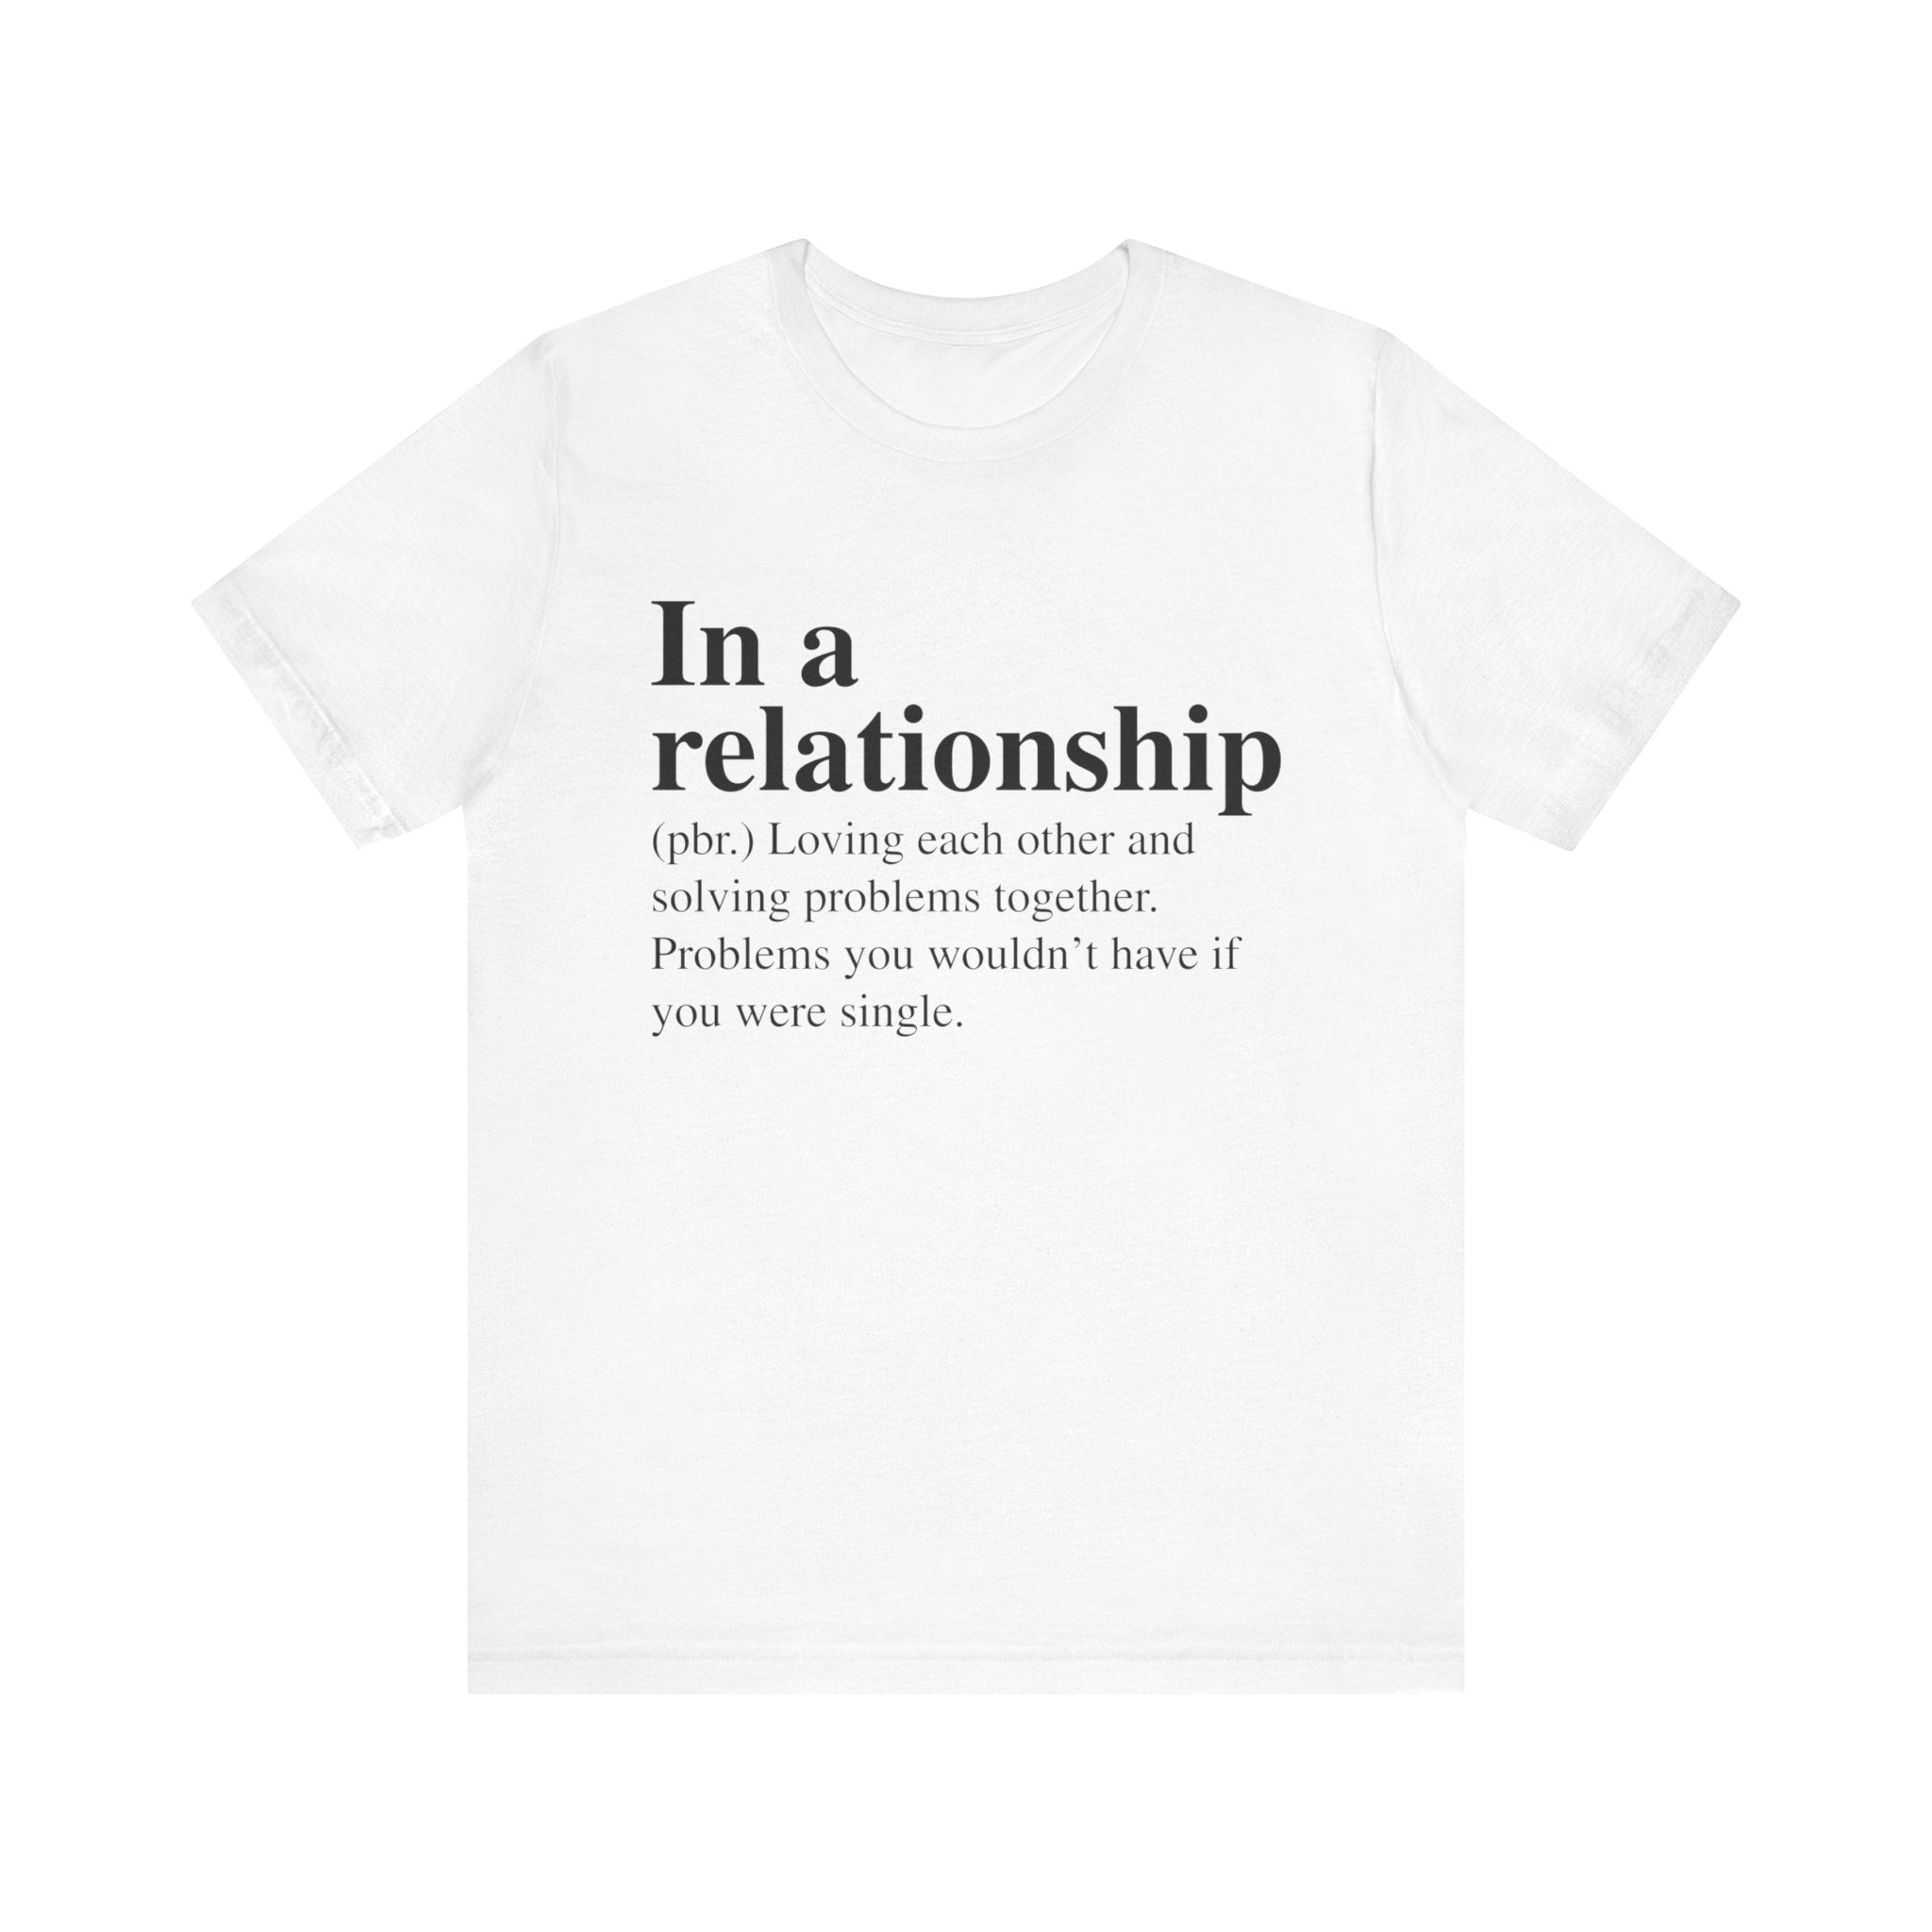 White unisex In a Relationship T-Shirt with black text stating "in a relationship (n.) problems you wouldn't have and solving problems together if you were single," made from soft cotton with quality print.